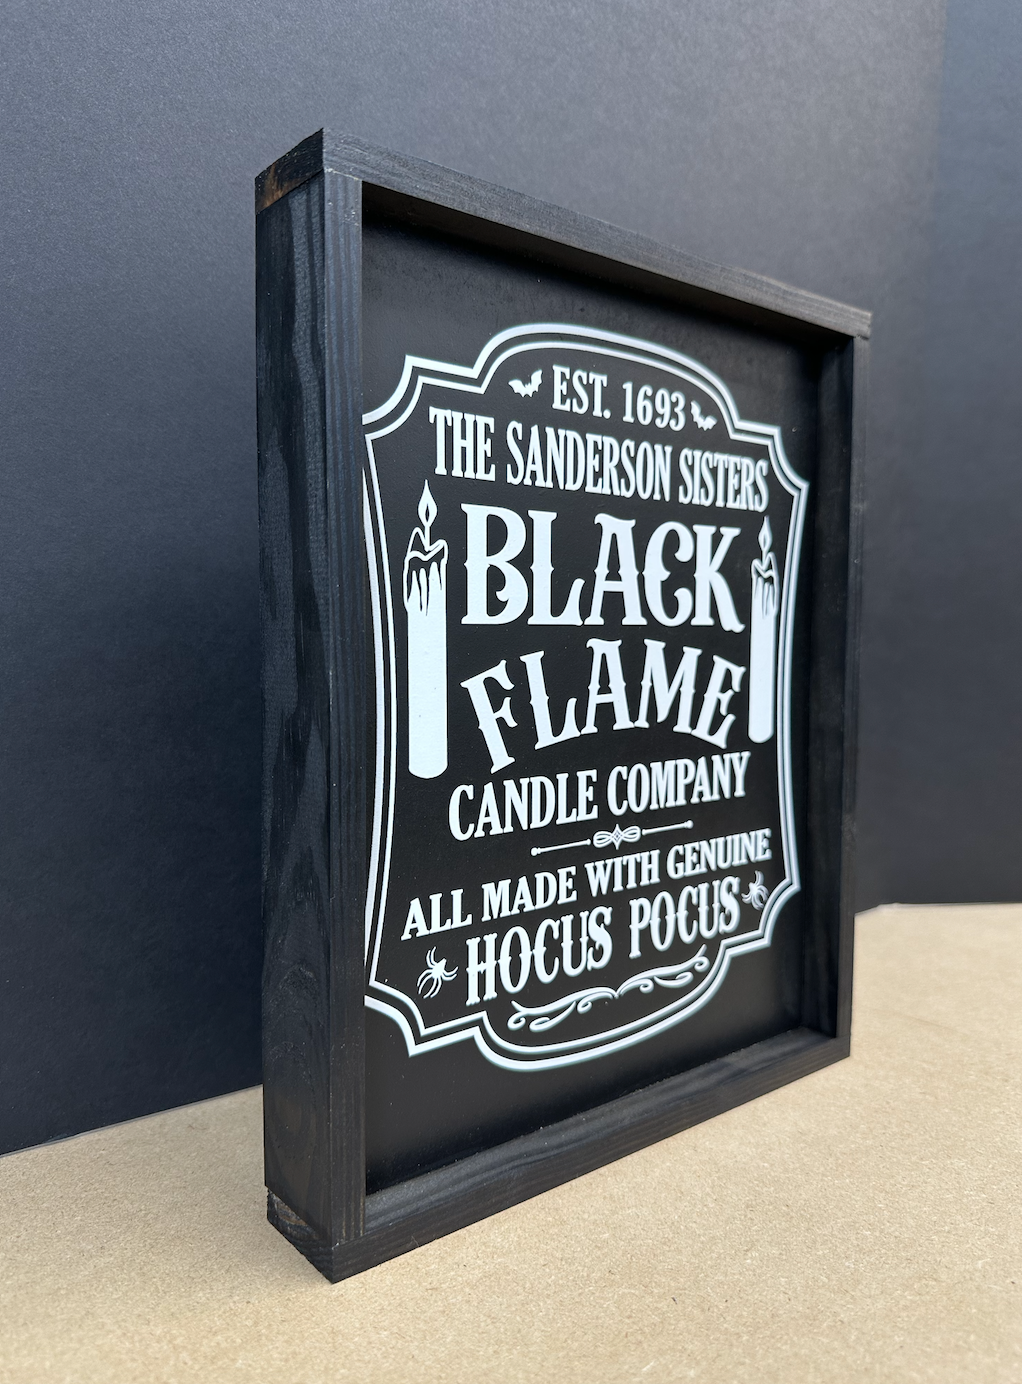 Black flame candle co sanderson sisters hocus pocus 2023 new wood sign